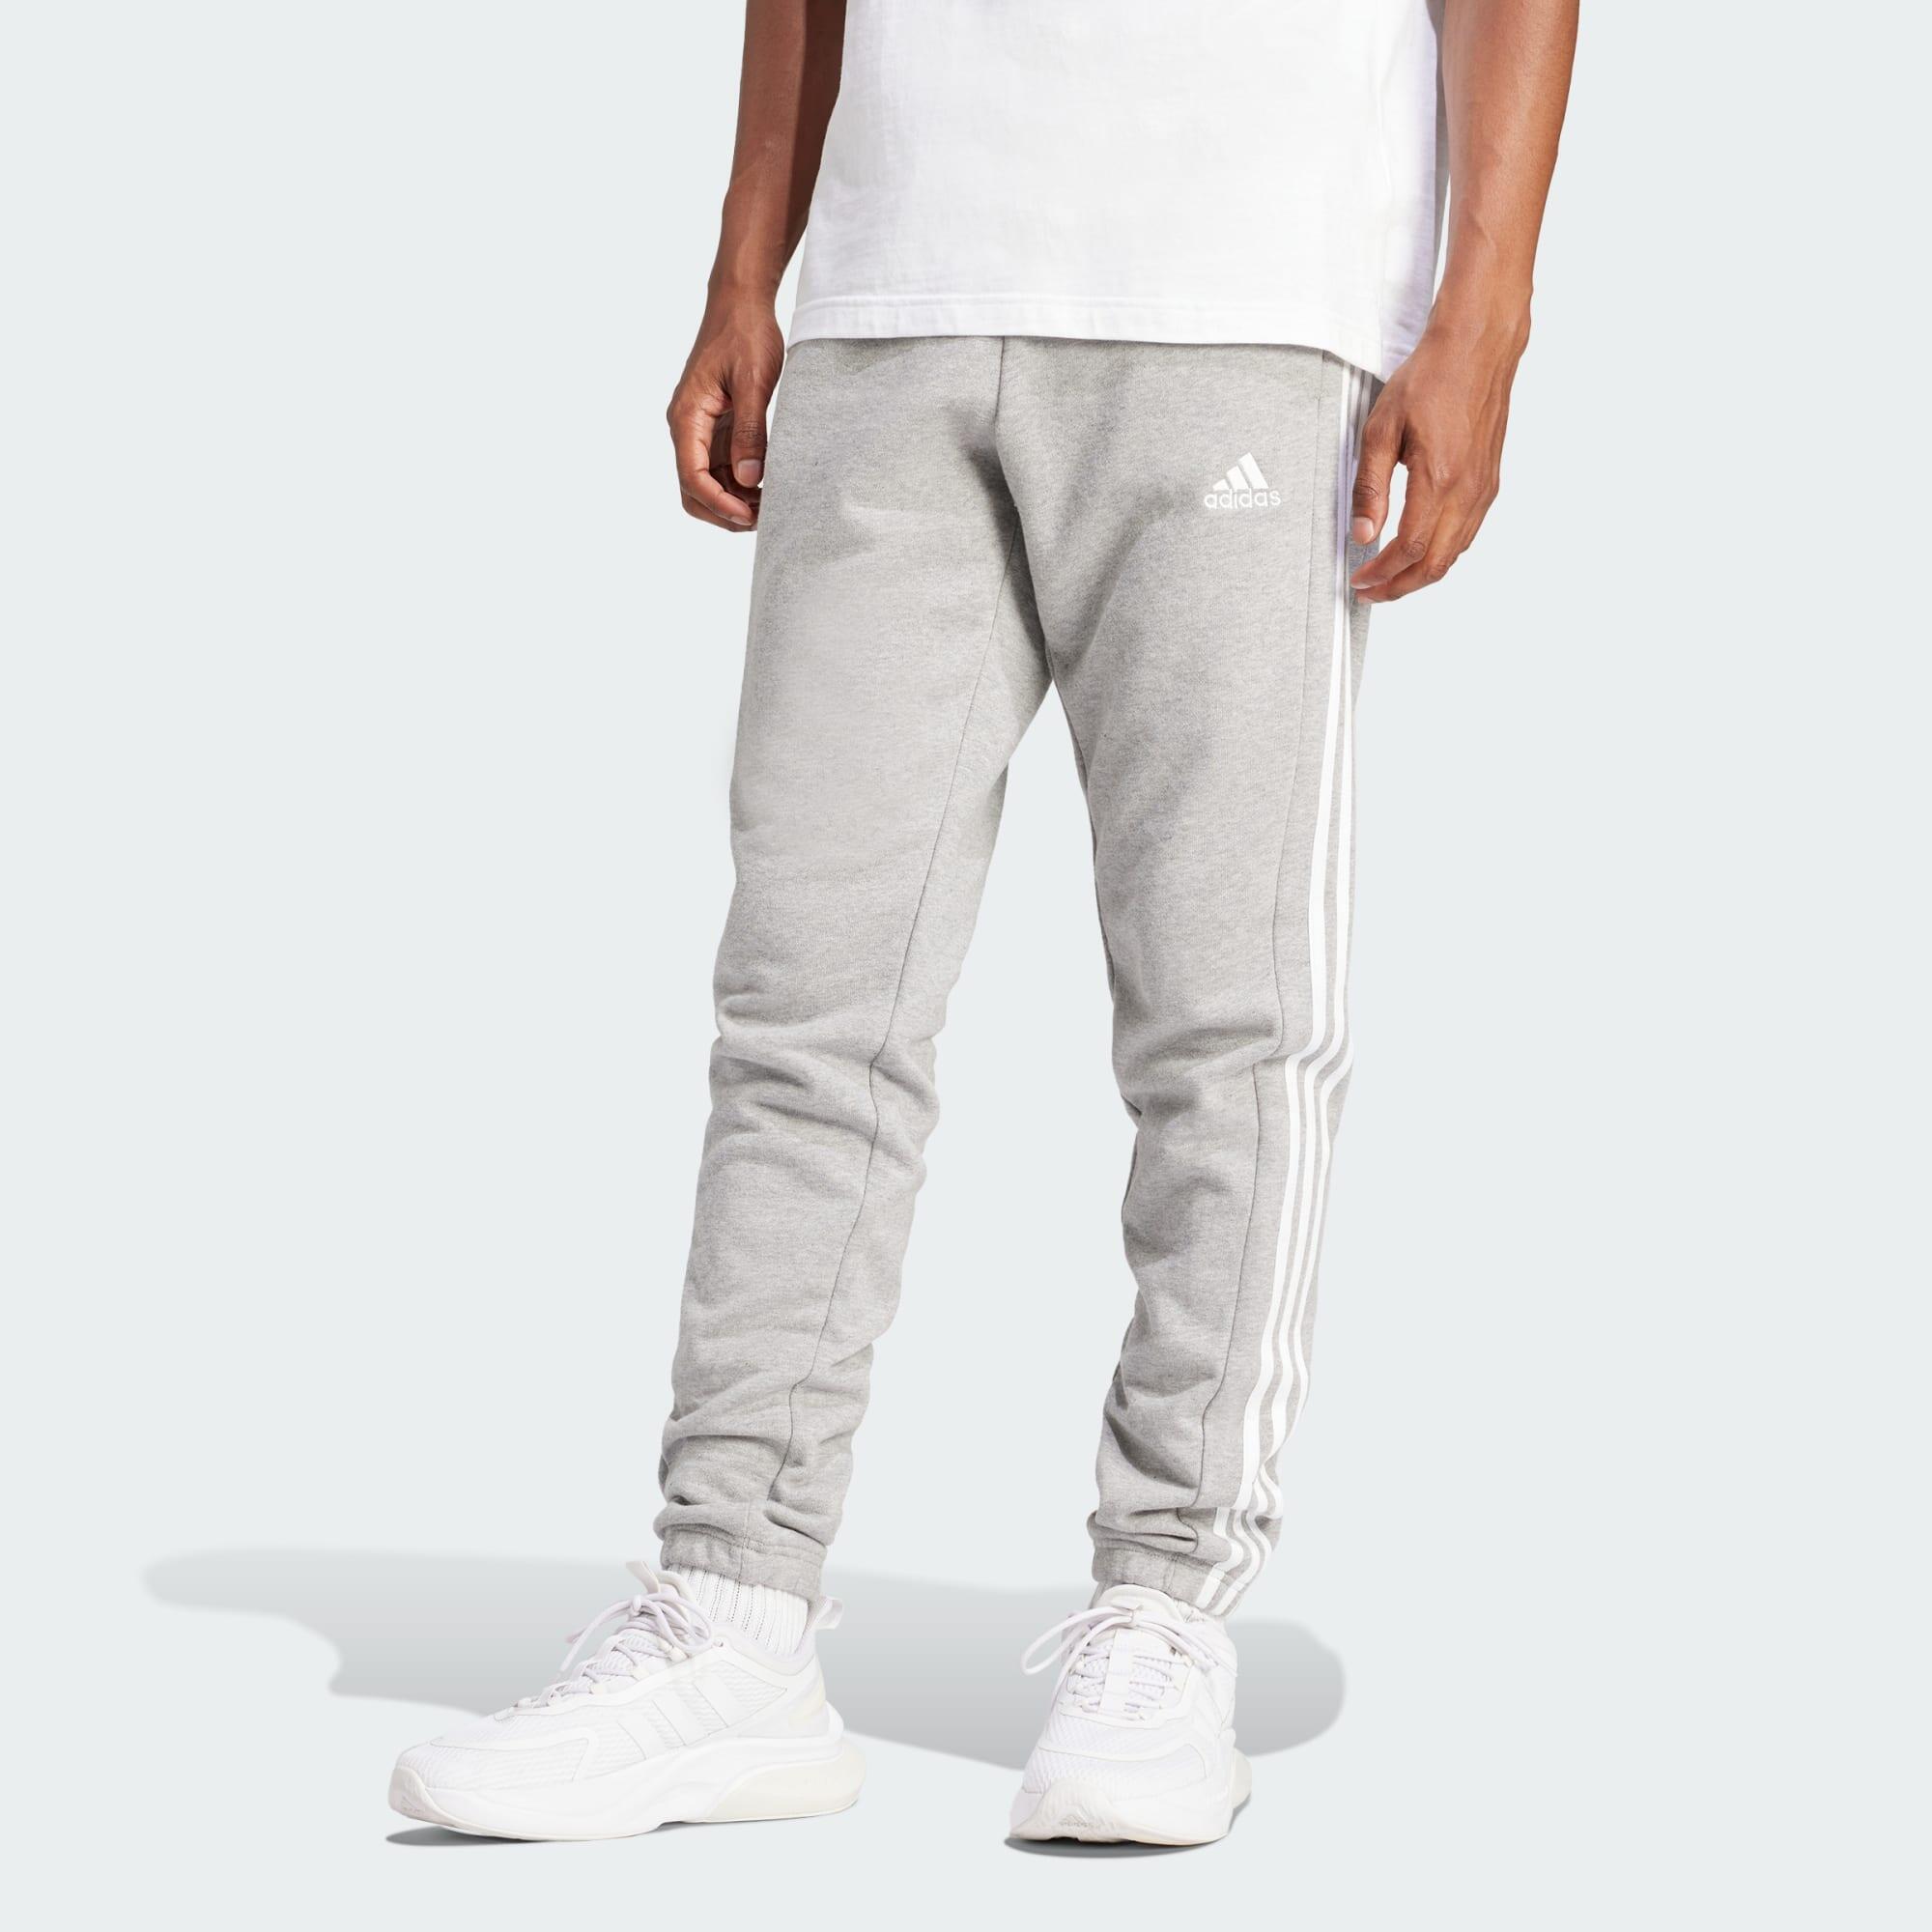 ADIDAS Essentials French Terry Tapered Elastic Cuff 3-Stripes Pants